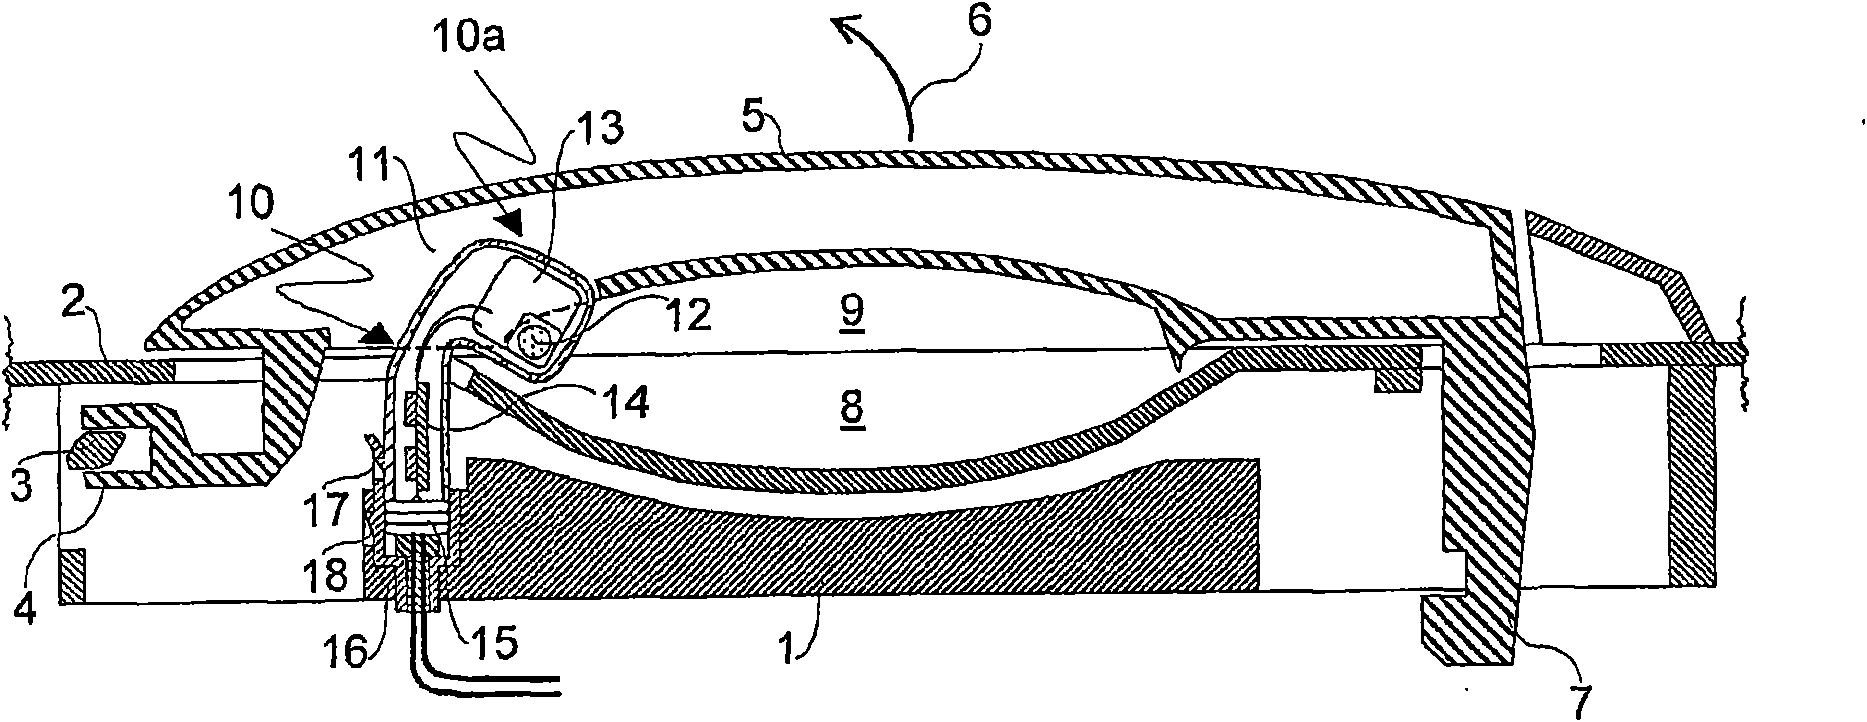 Vehicle handle with a lighting device